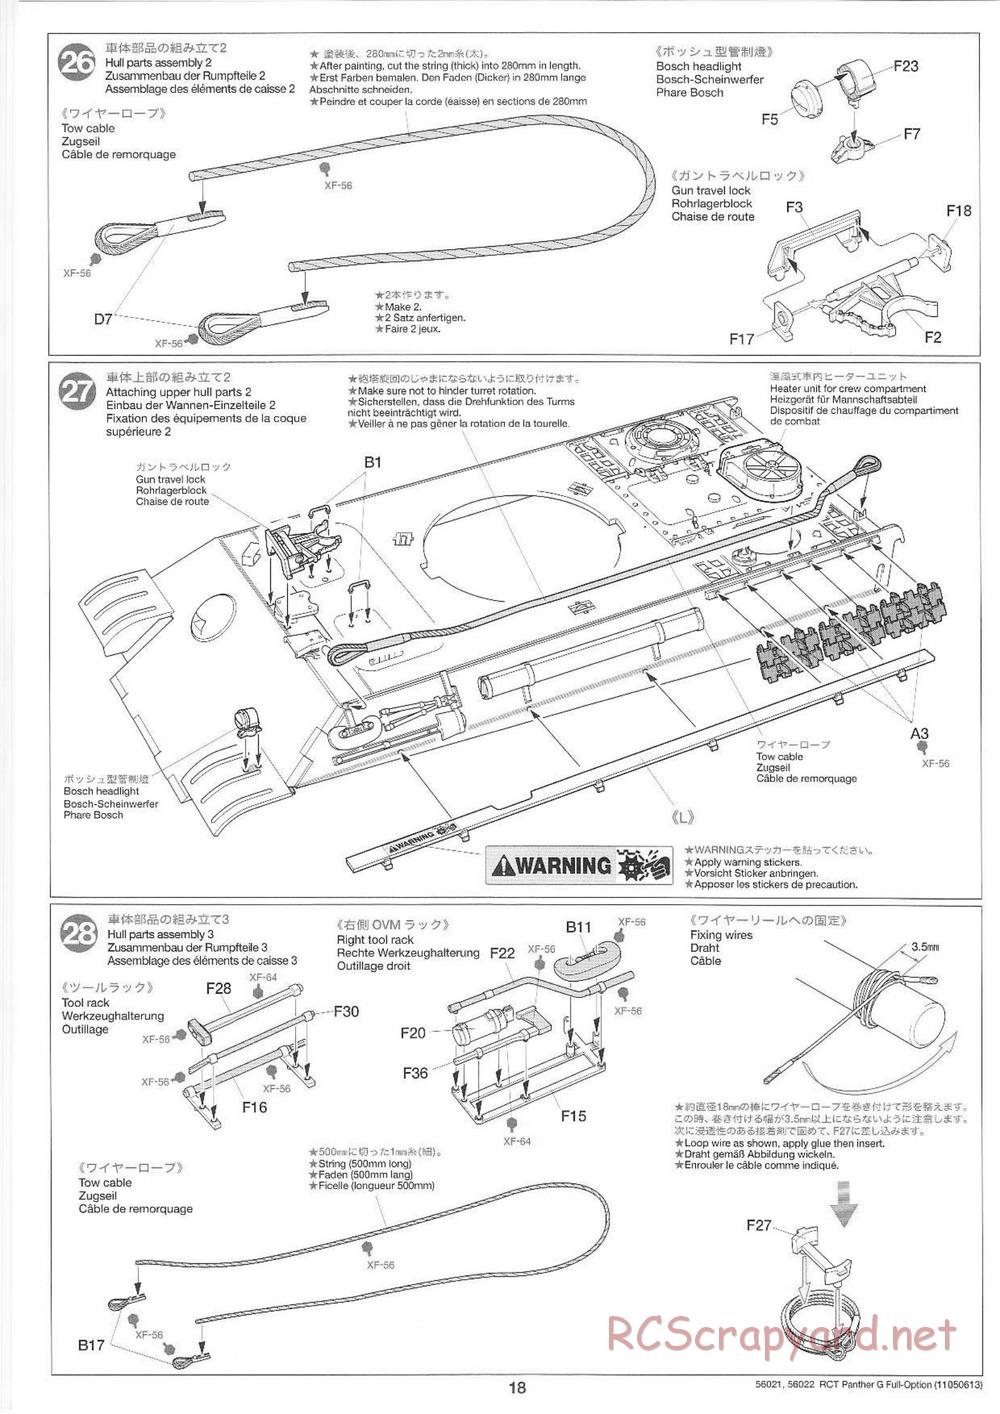 Tamiya - Panther Type G - 1/16 Scale Chassis - Manual - Page 18